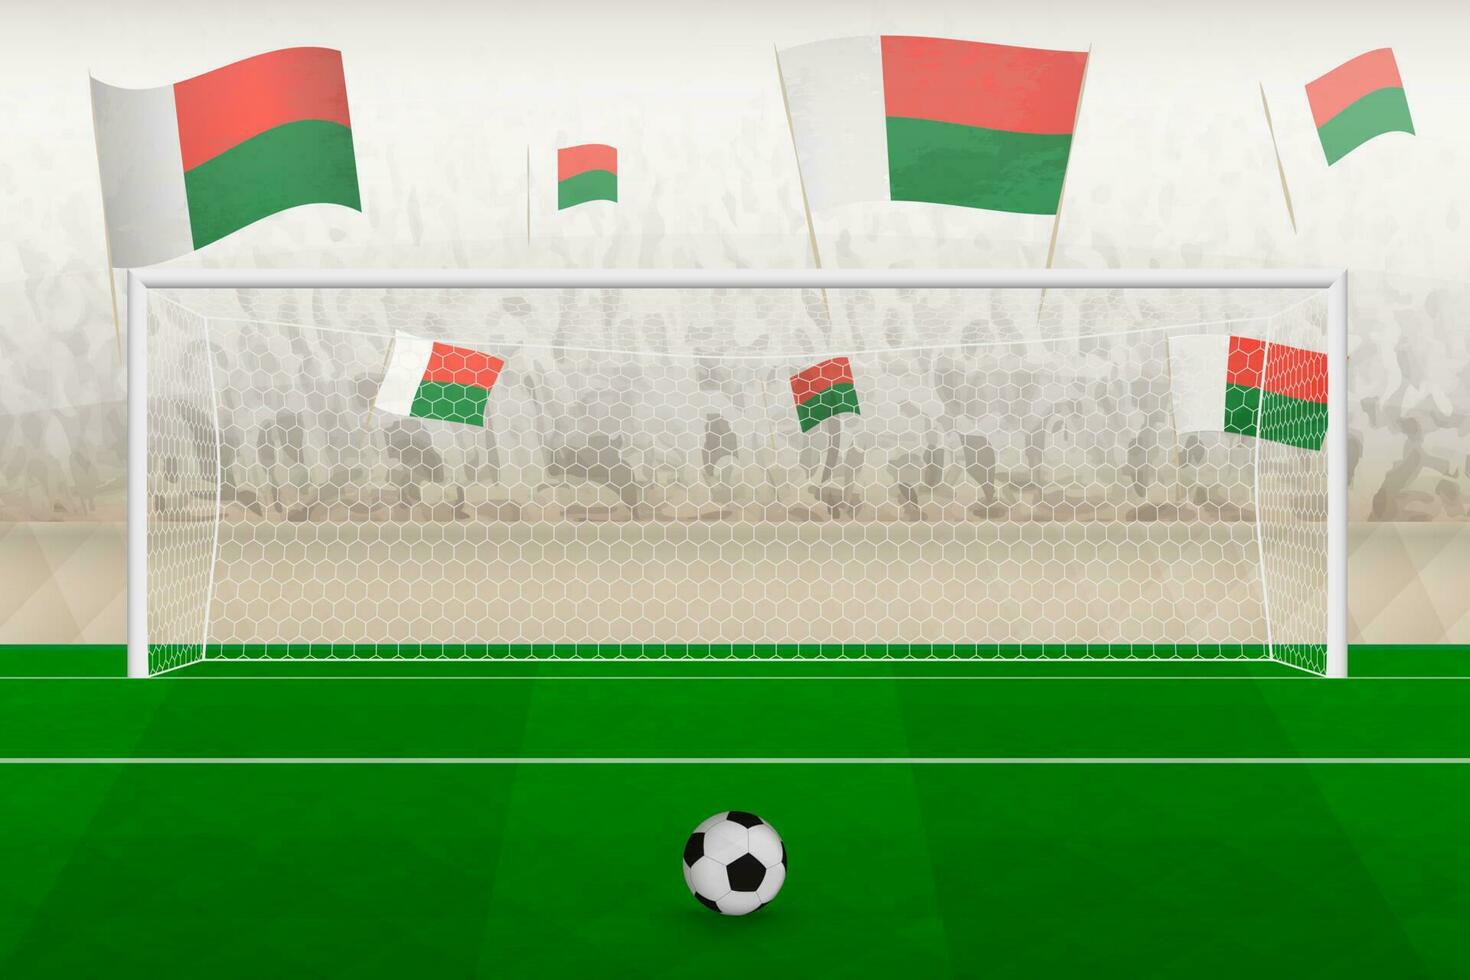 Madagascar football team fans with flags of Madagascar cheering on stadium, penalty kick concept in a soccer match. vector